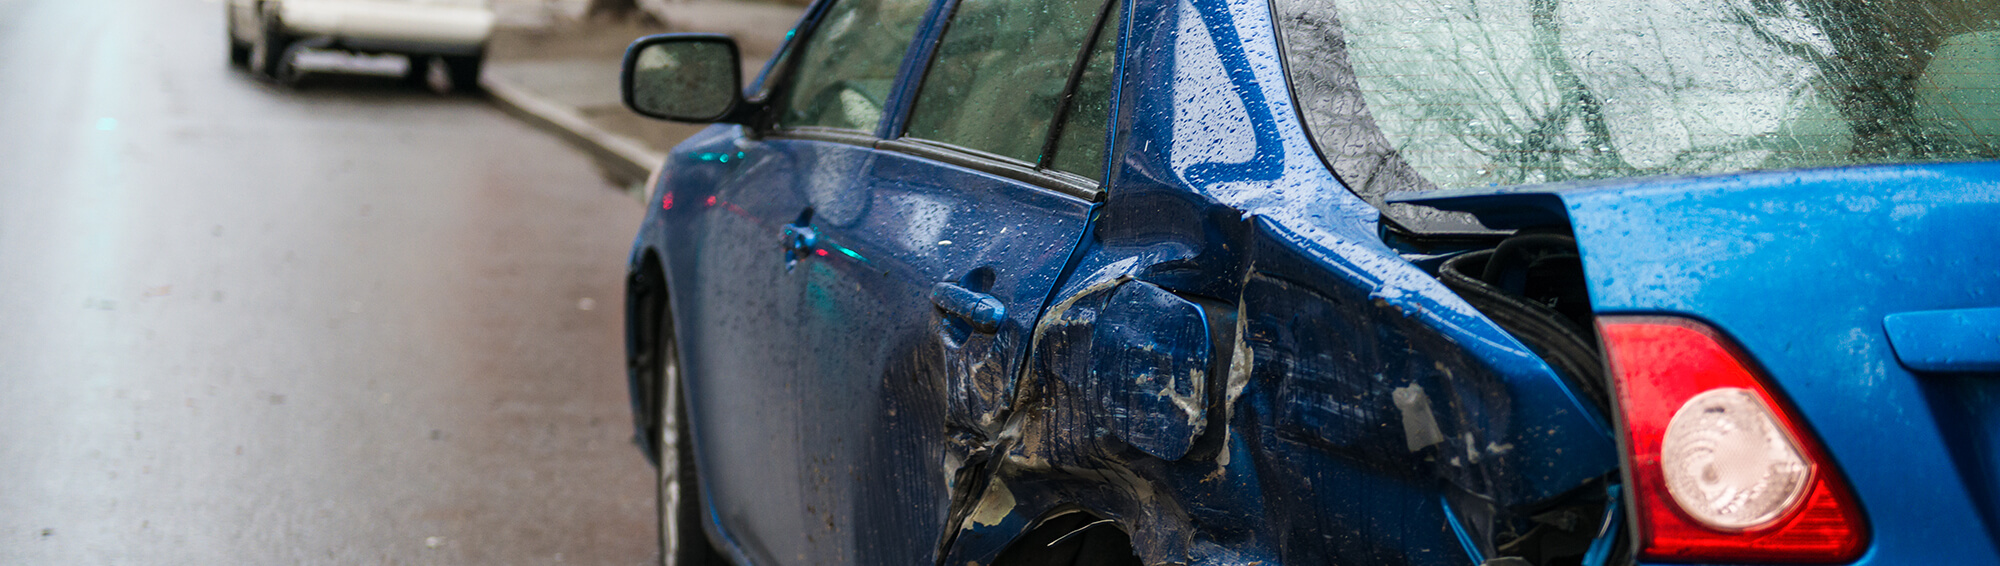 Don’t Accept the Insurance Company’s Offer After a Crash Without a Lawyer